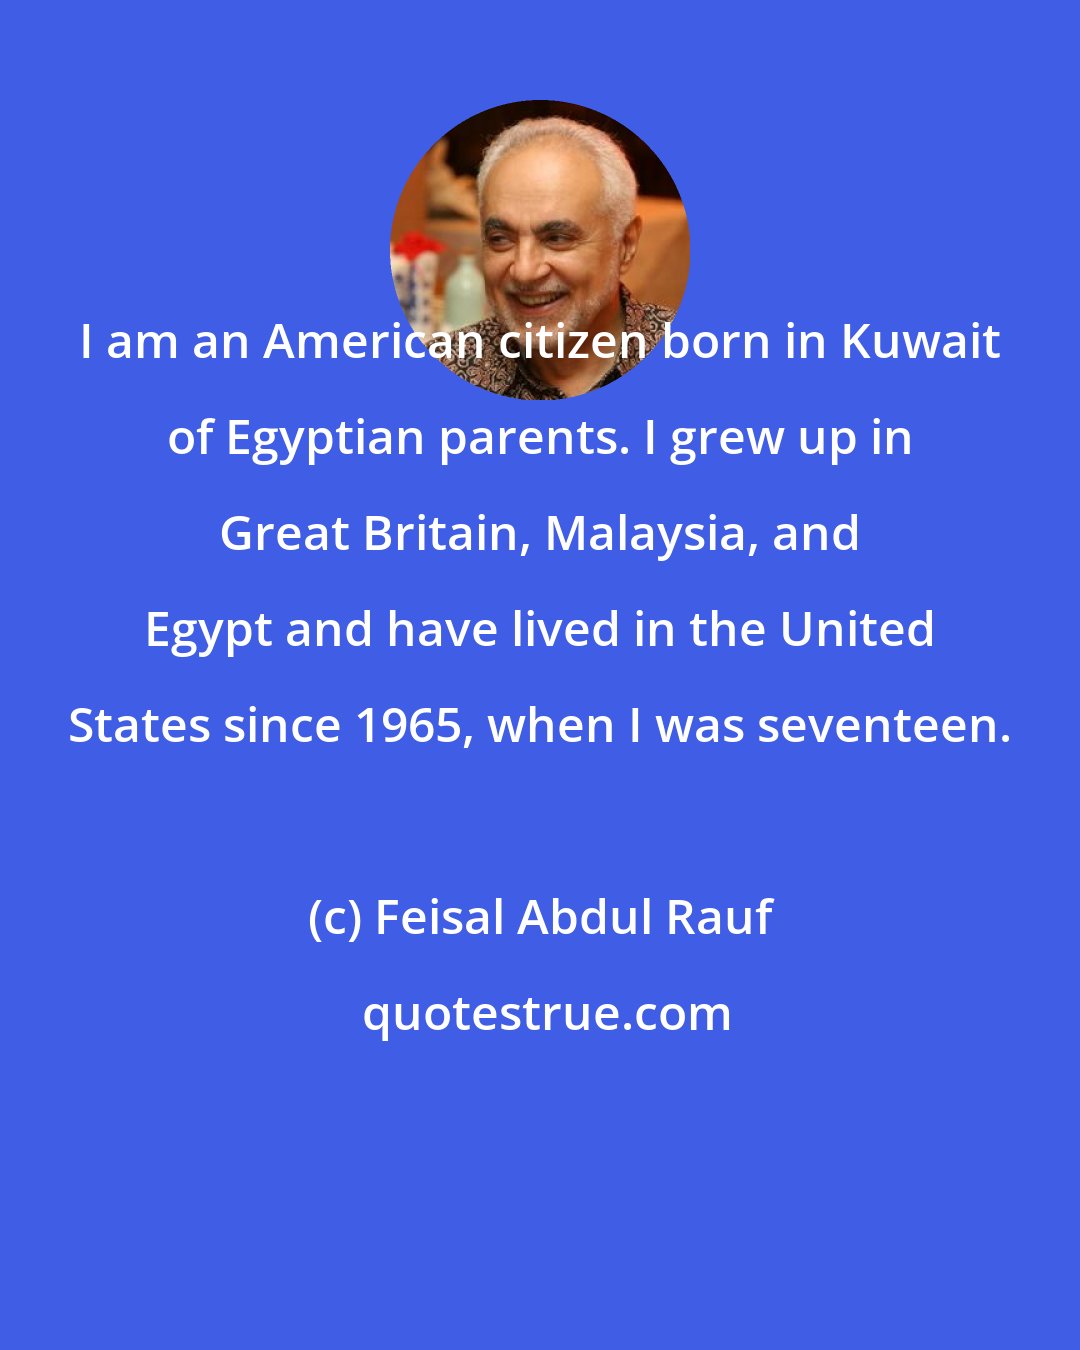 Feisal Abdul Rauf: I am an American citizen born in Kuwait of Egyptian parents. I grew up in Great Britain, Malaysia, and Egypt and have lived in the United States since 1965, when I was seventeen.